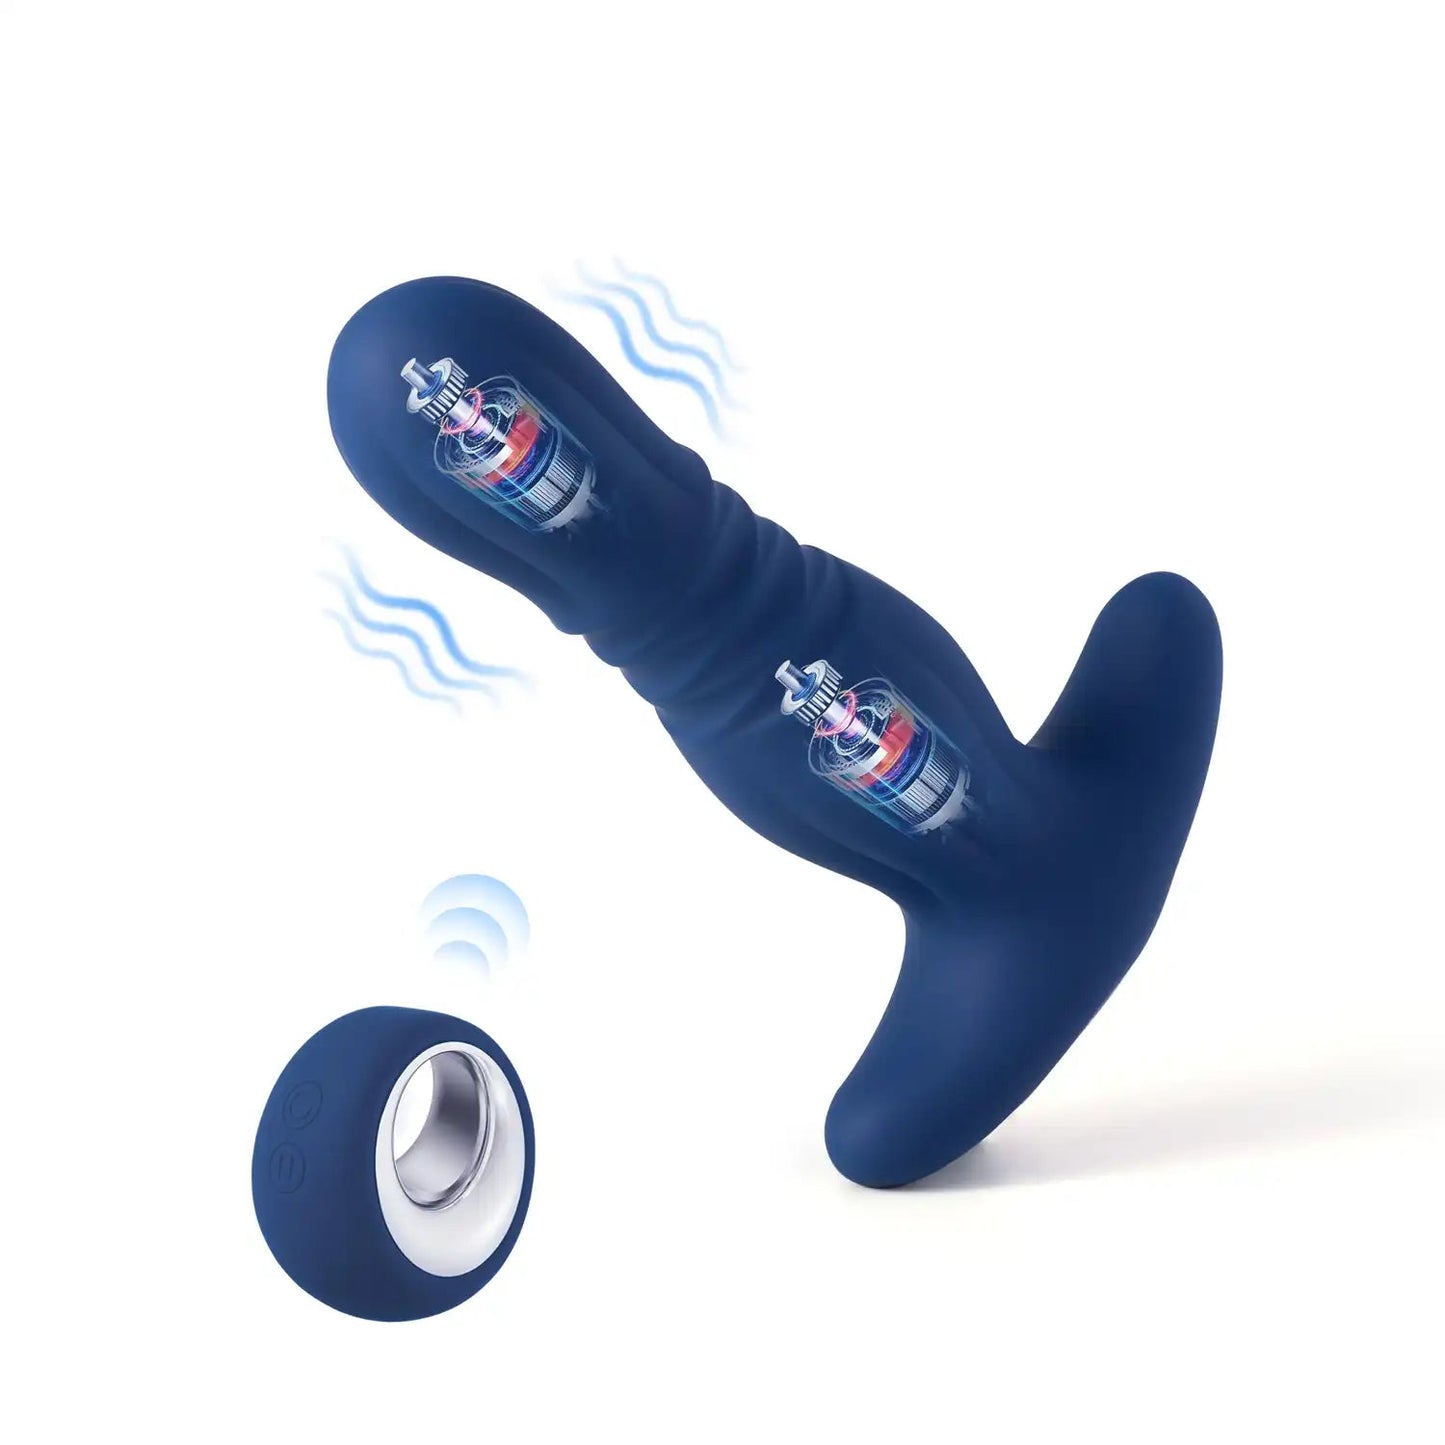 AGAS Thrusting Butt Plug with Remote Control